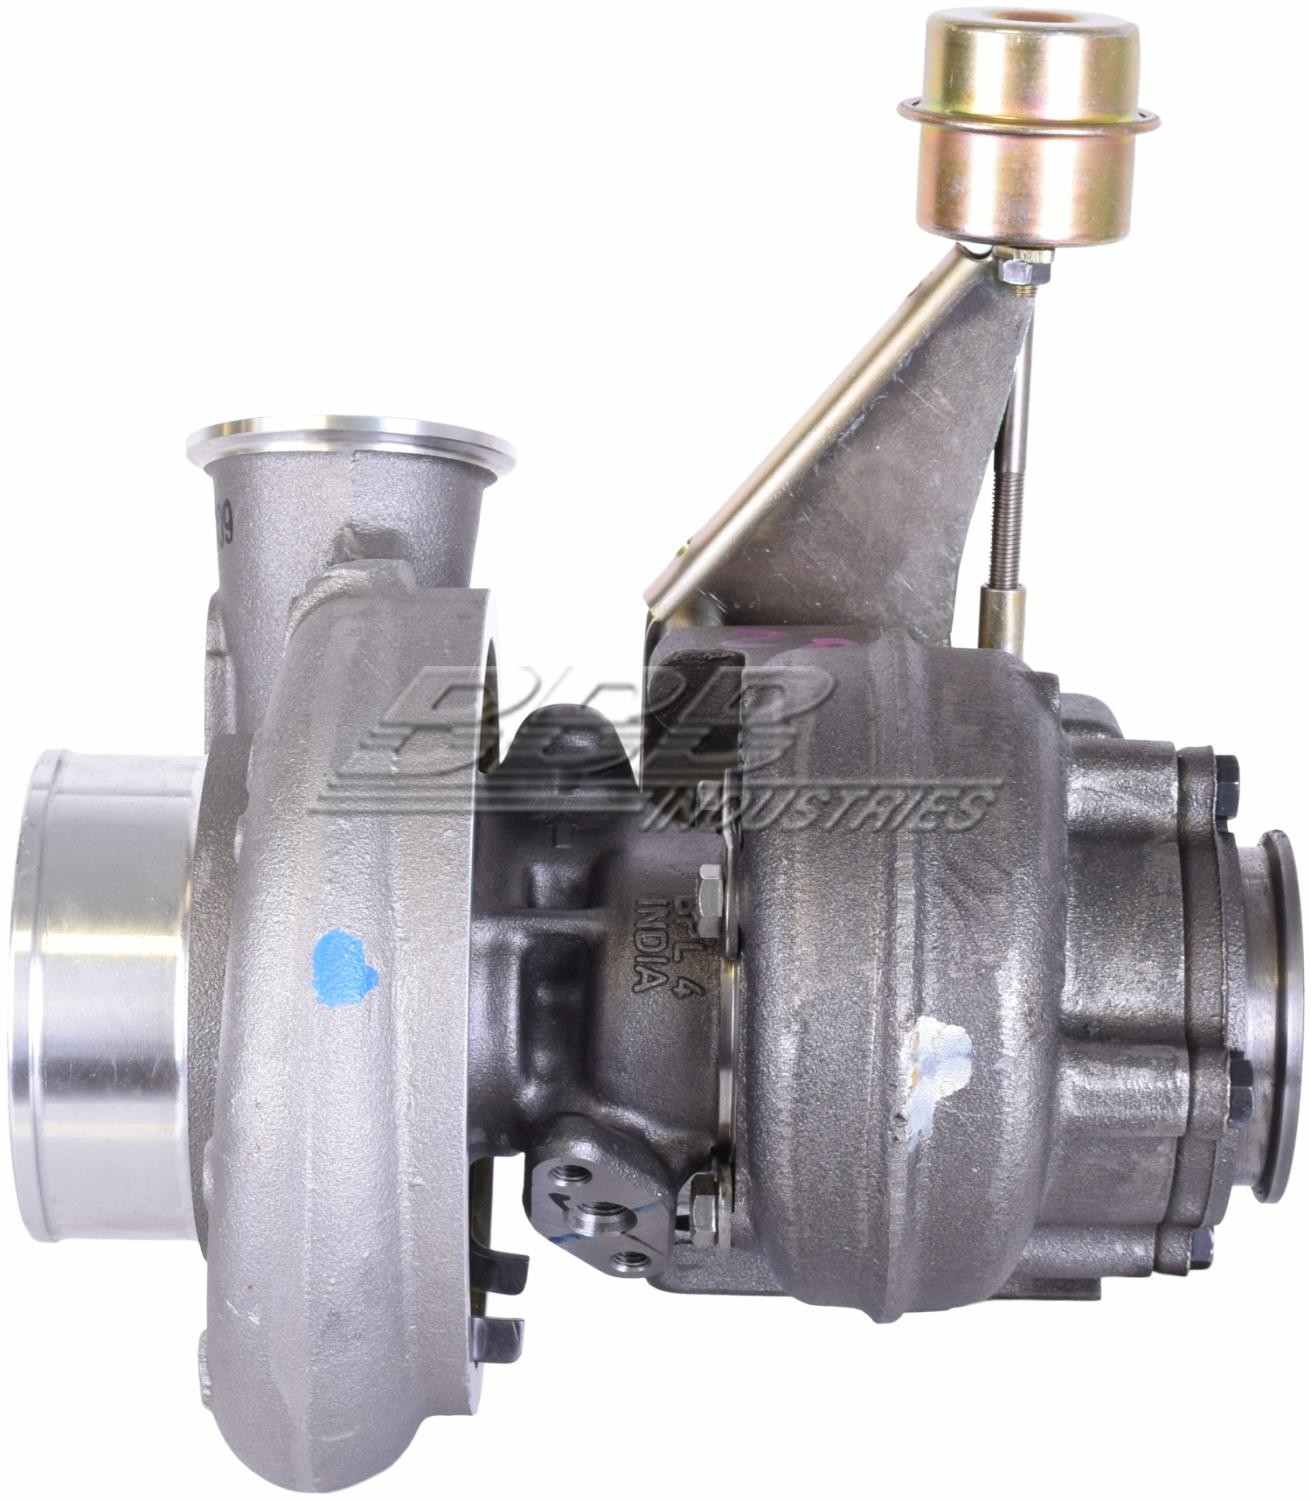 OE-TurboPower Remanufactured Turbocharger  top view frsport D2009